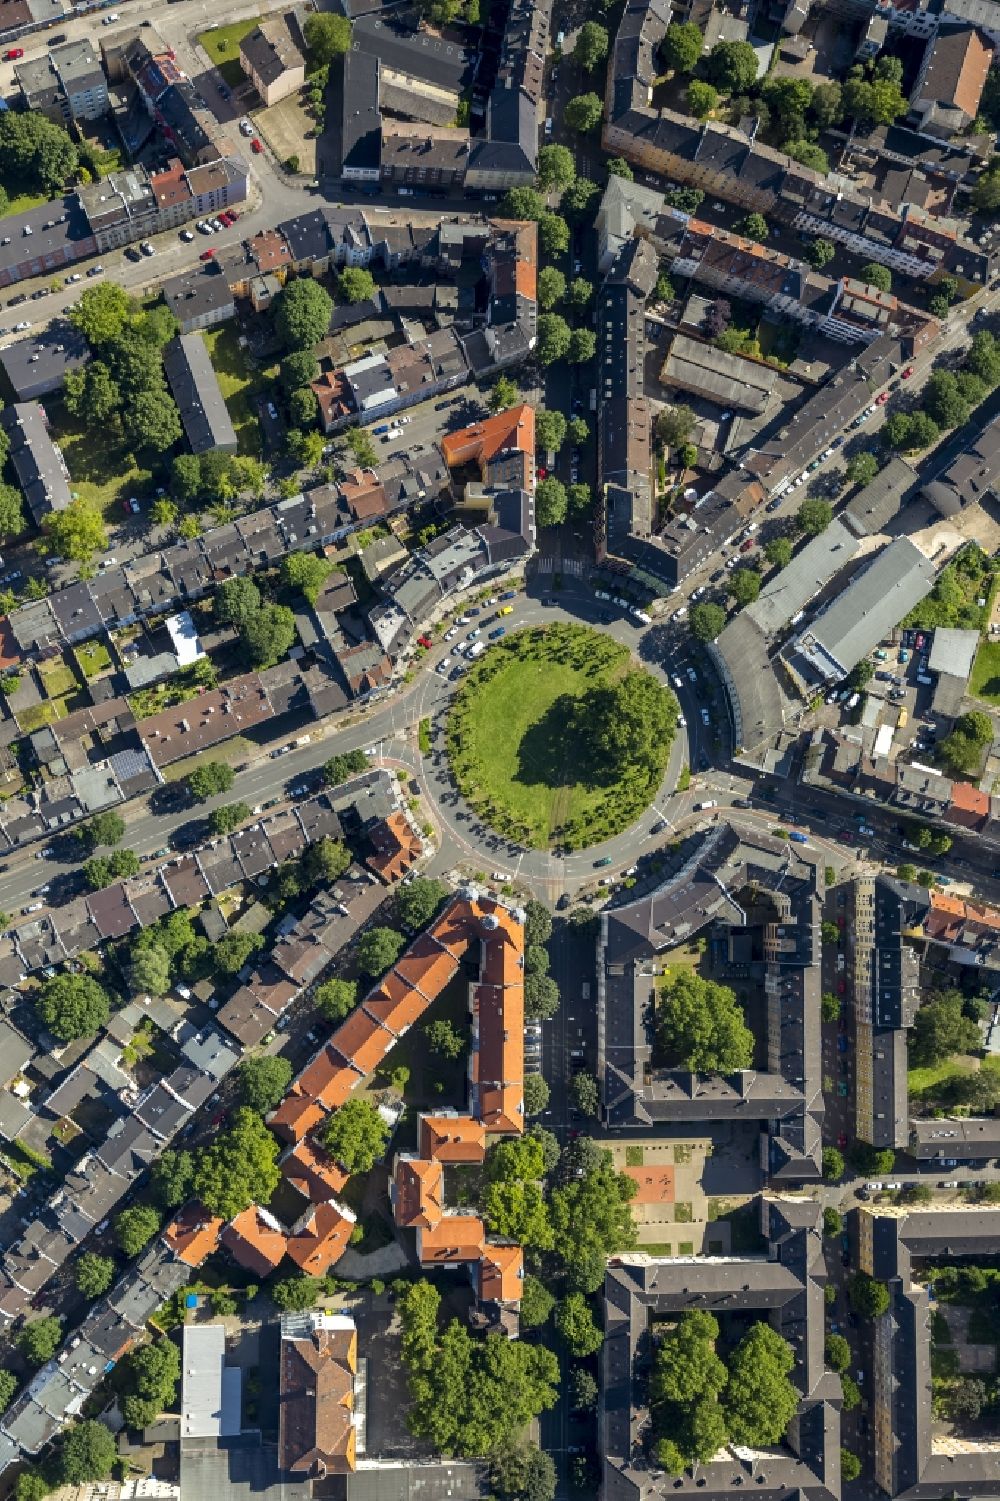 Vertical aerial photograph Dortmund - Perpendicular recording from the residential area at the roundabout Borsigplatz in Dortmund in North Rhine-Westphalia